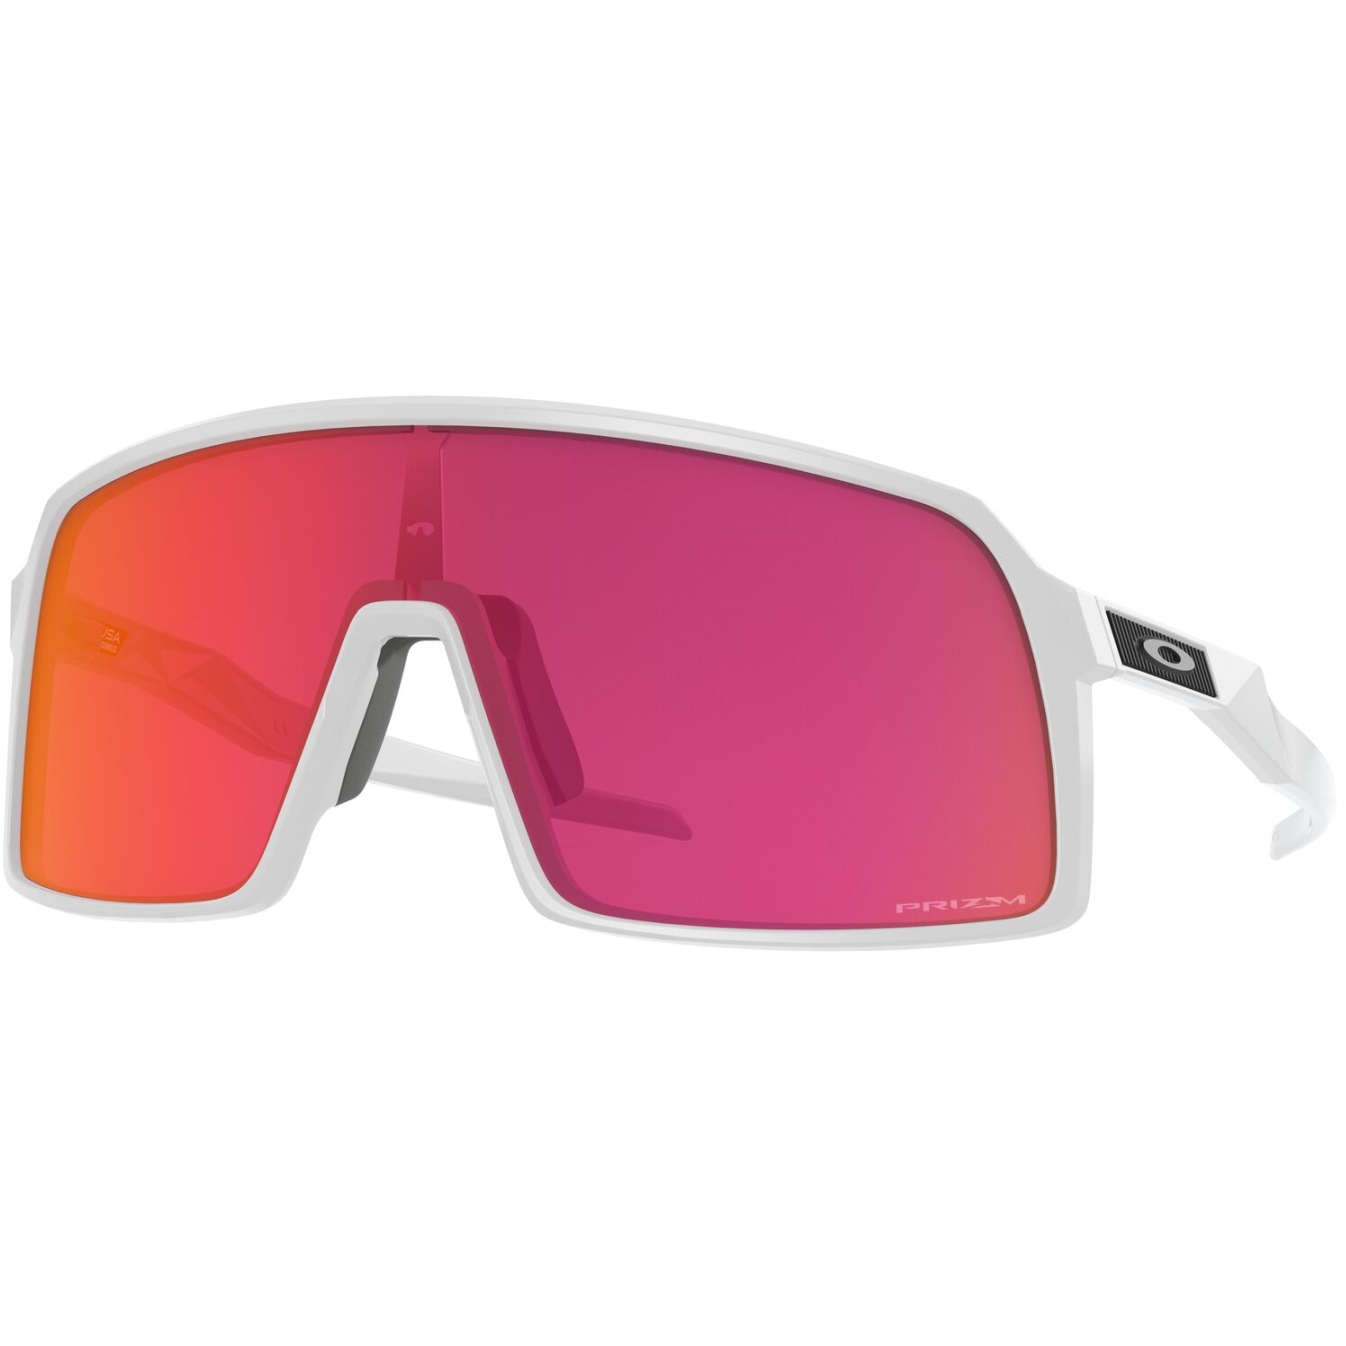 Image of Oakley Sutro Glasses - Polished White/Prizm Field - OO9406-9137